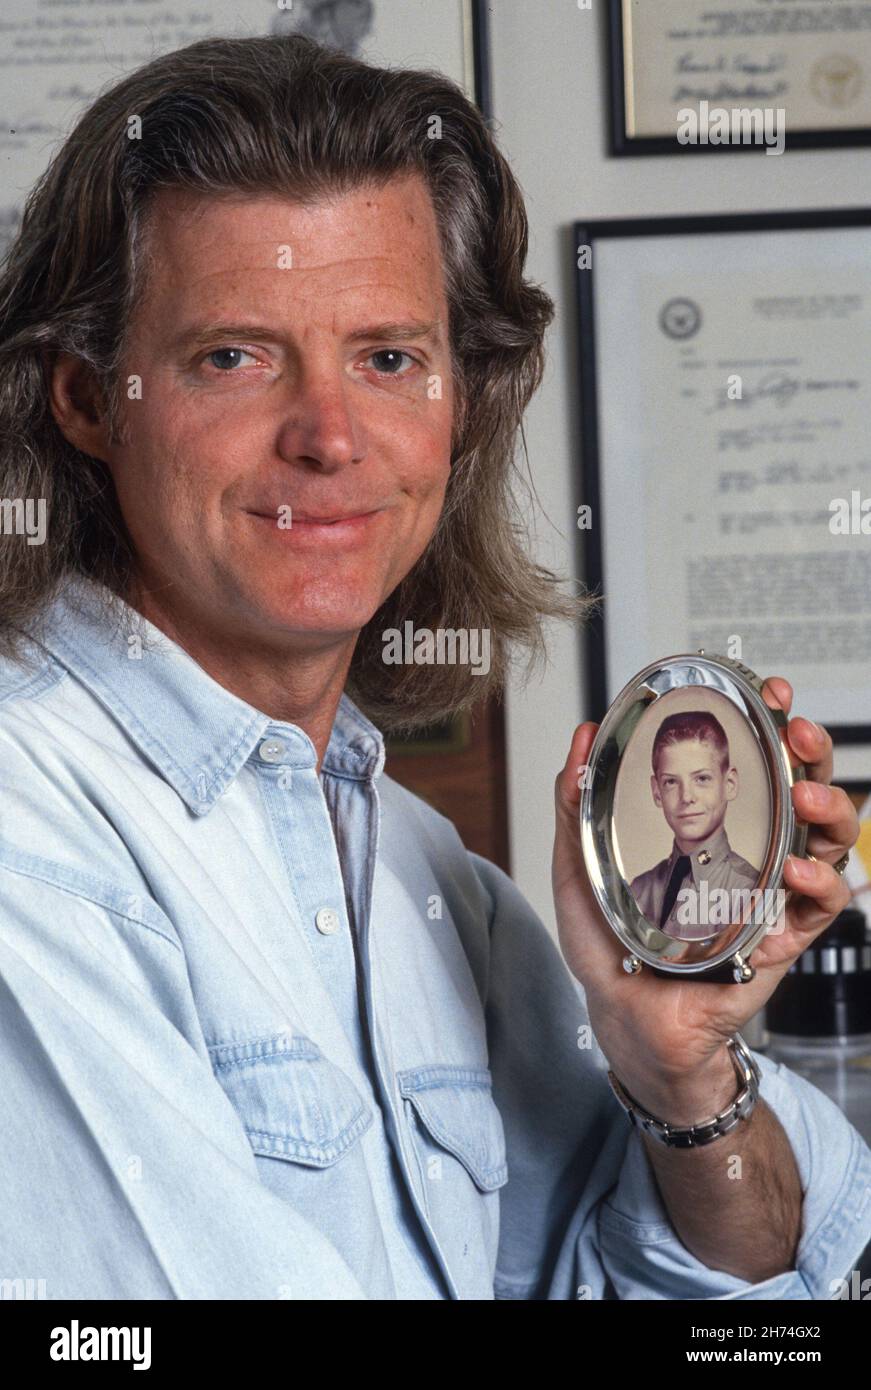 1990s Middle Aged man with Long Hair Holds a 7th Grade school Class Photo of Him with a Crewcurt , USA Stock Photo